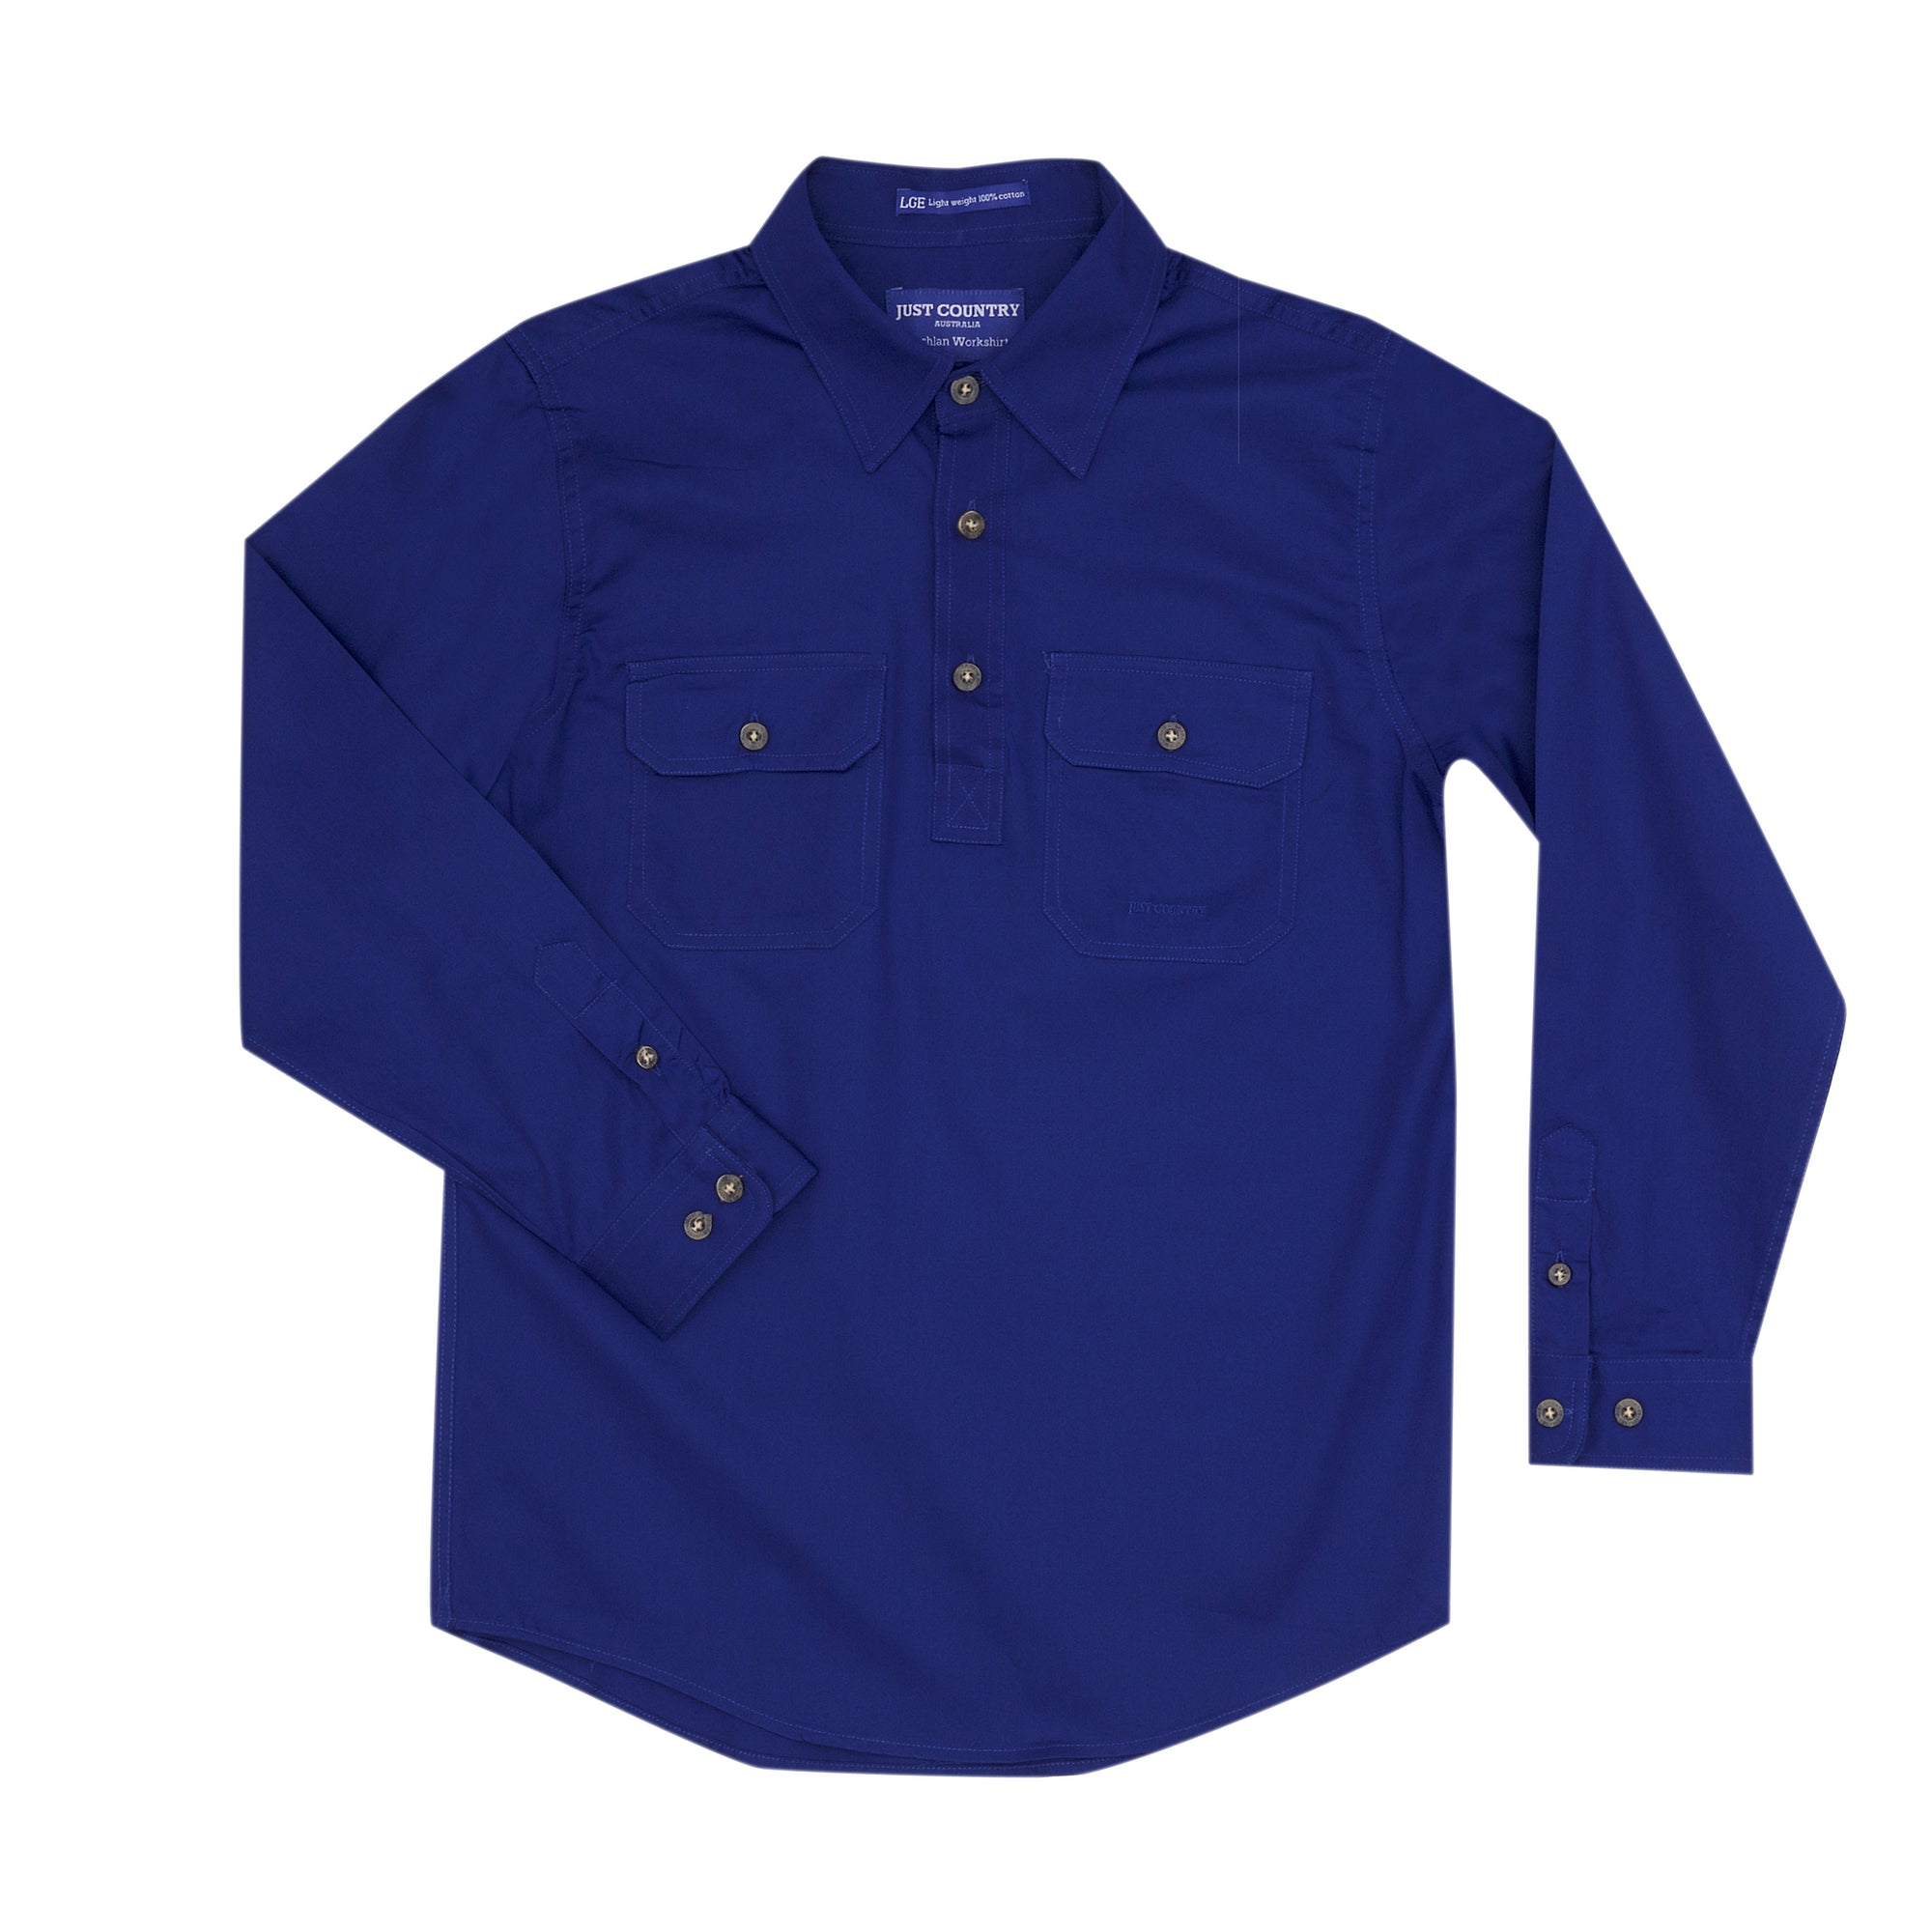 Just Country Workshirt Boys Lachlan Cobalt